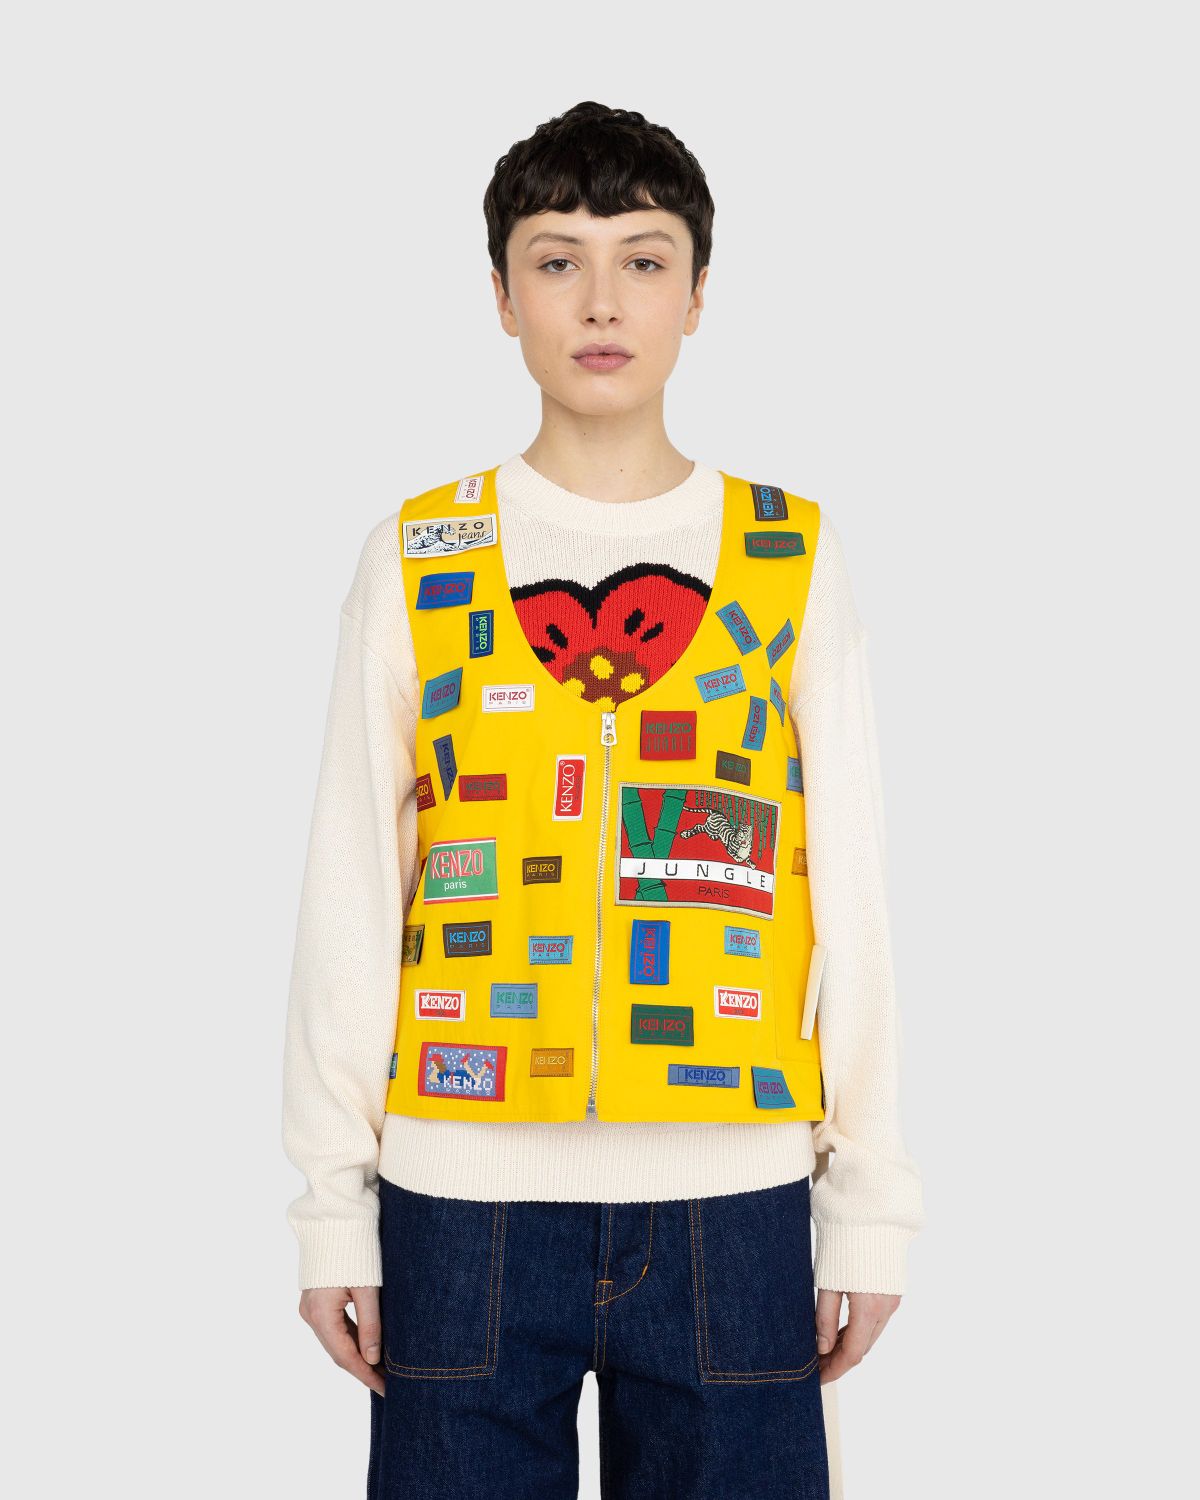 Kenzo – ‘Archives Labels’ Vest - Outerwear - Yellow - Image 3